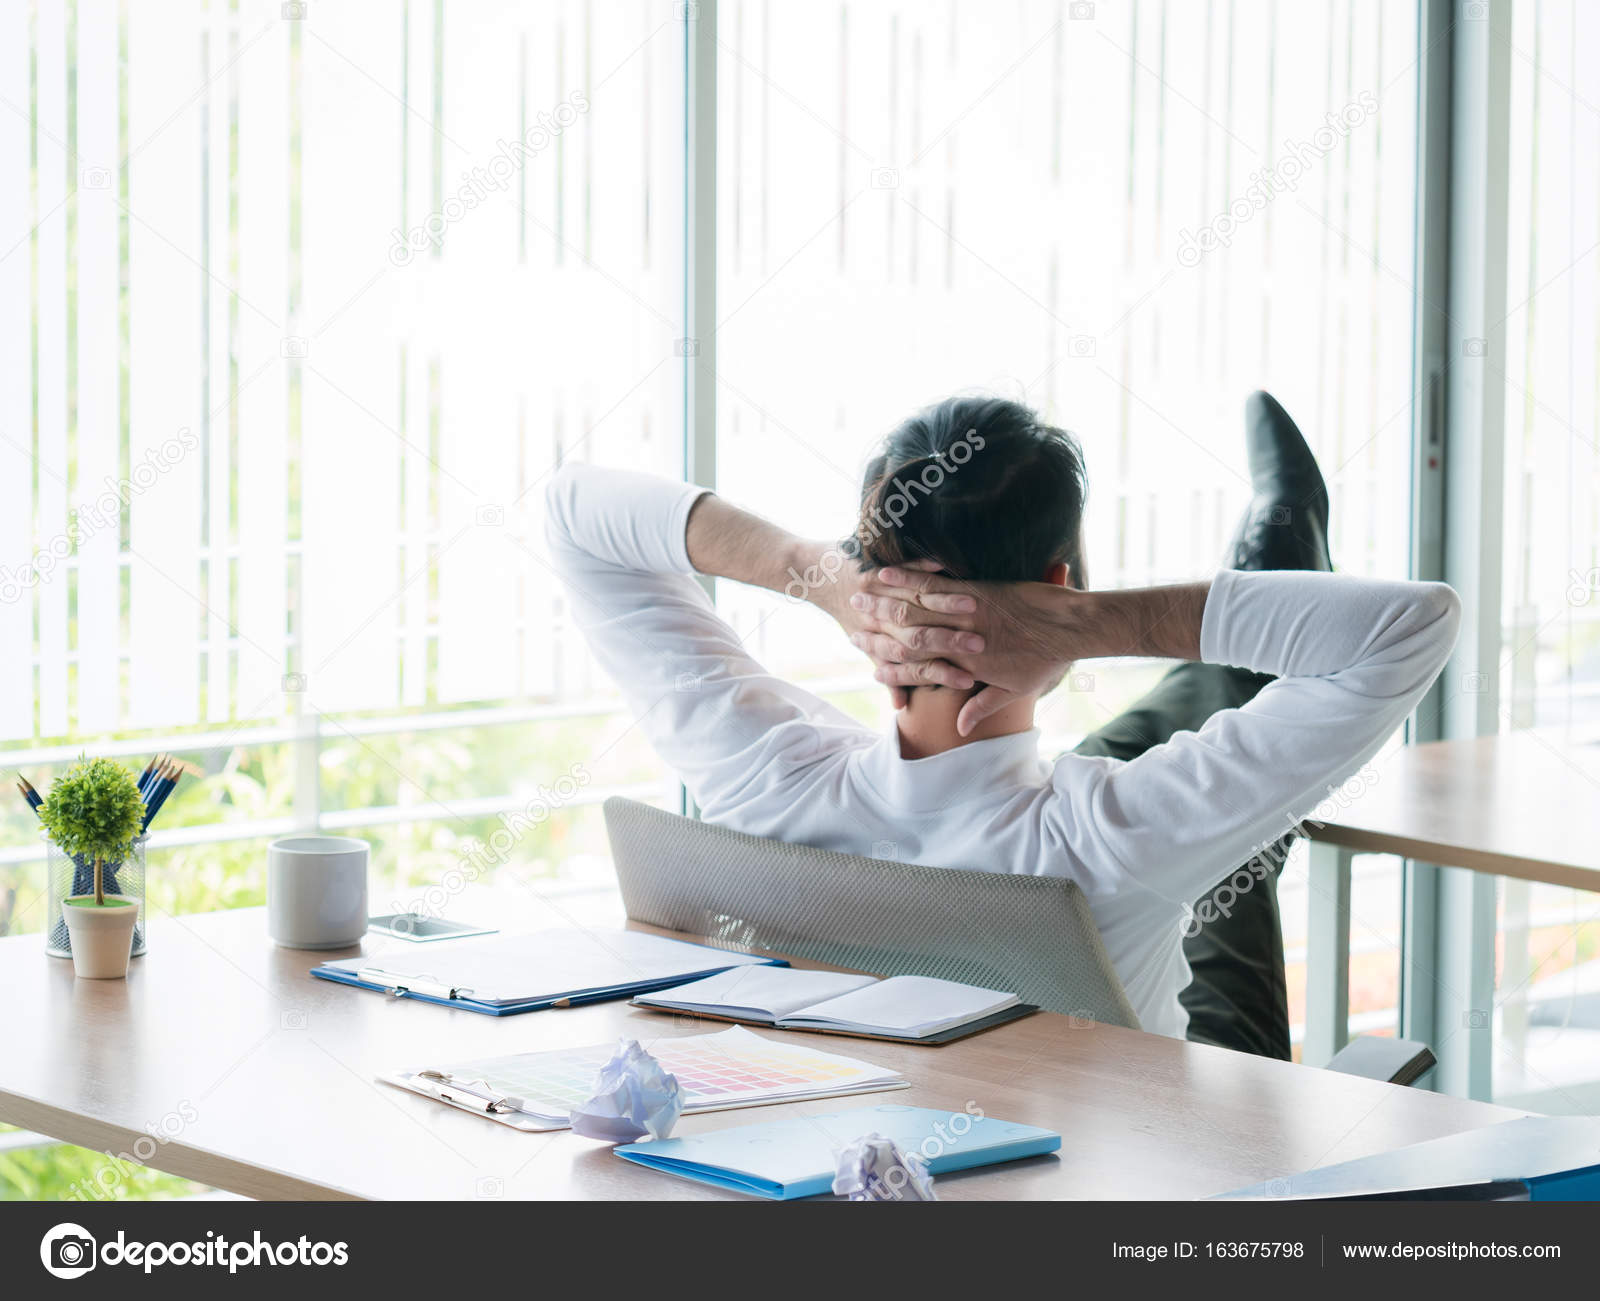 Businessman sitting in office with feet up on desk - Stock Photo